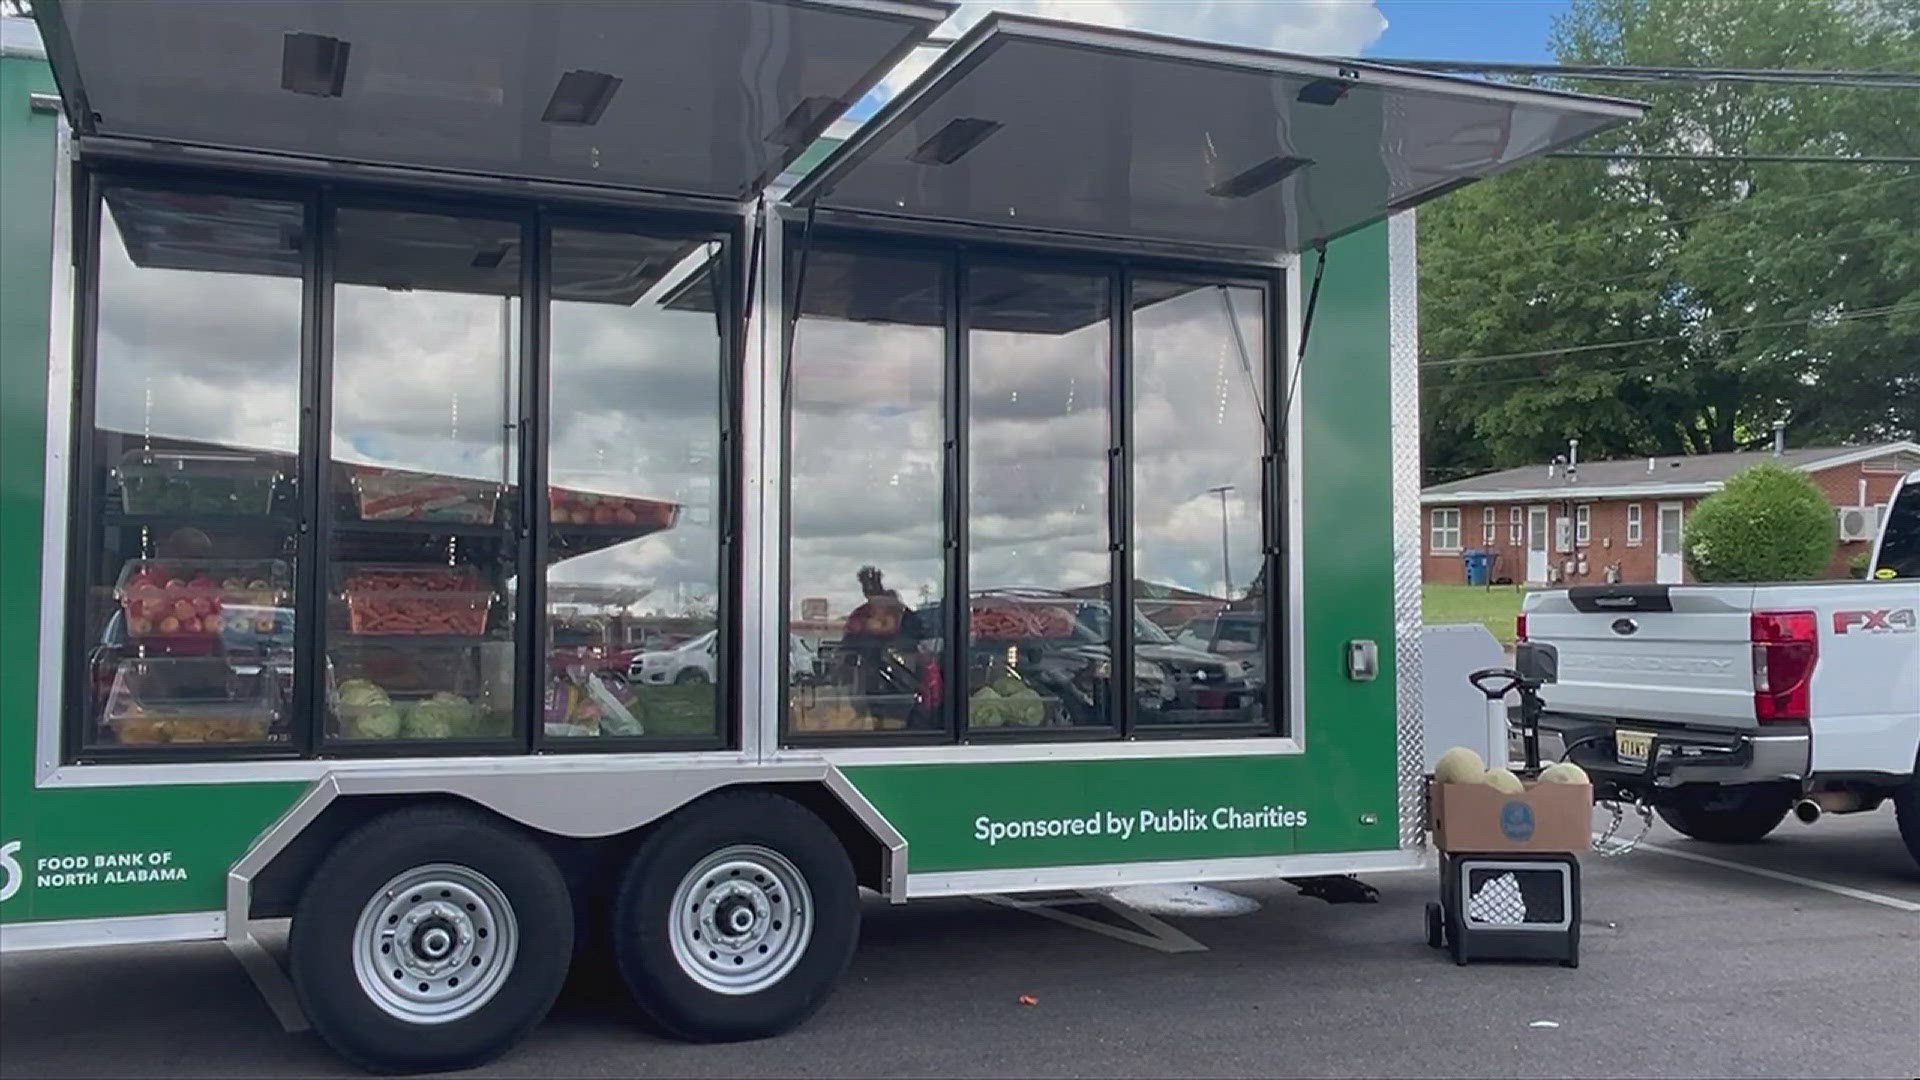 This mobile food pantry’s next stops are in Cullman and Decatur.